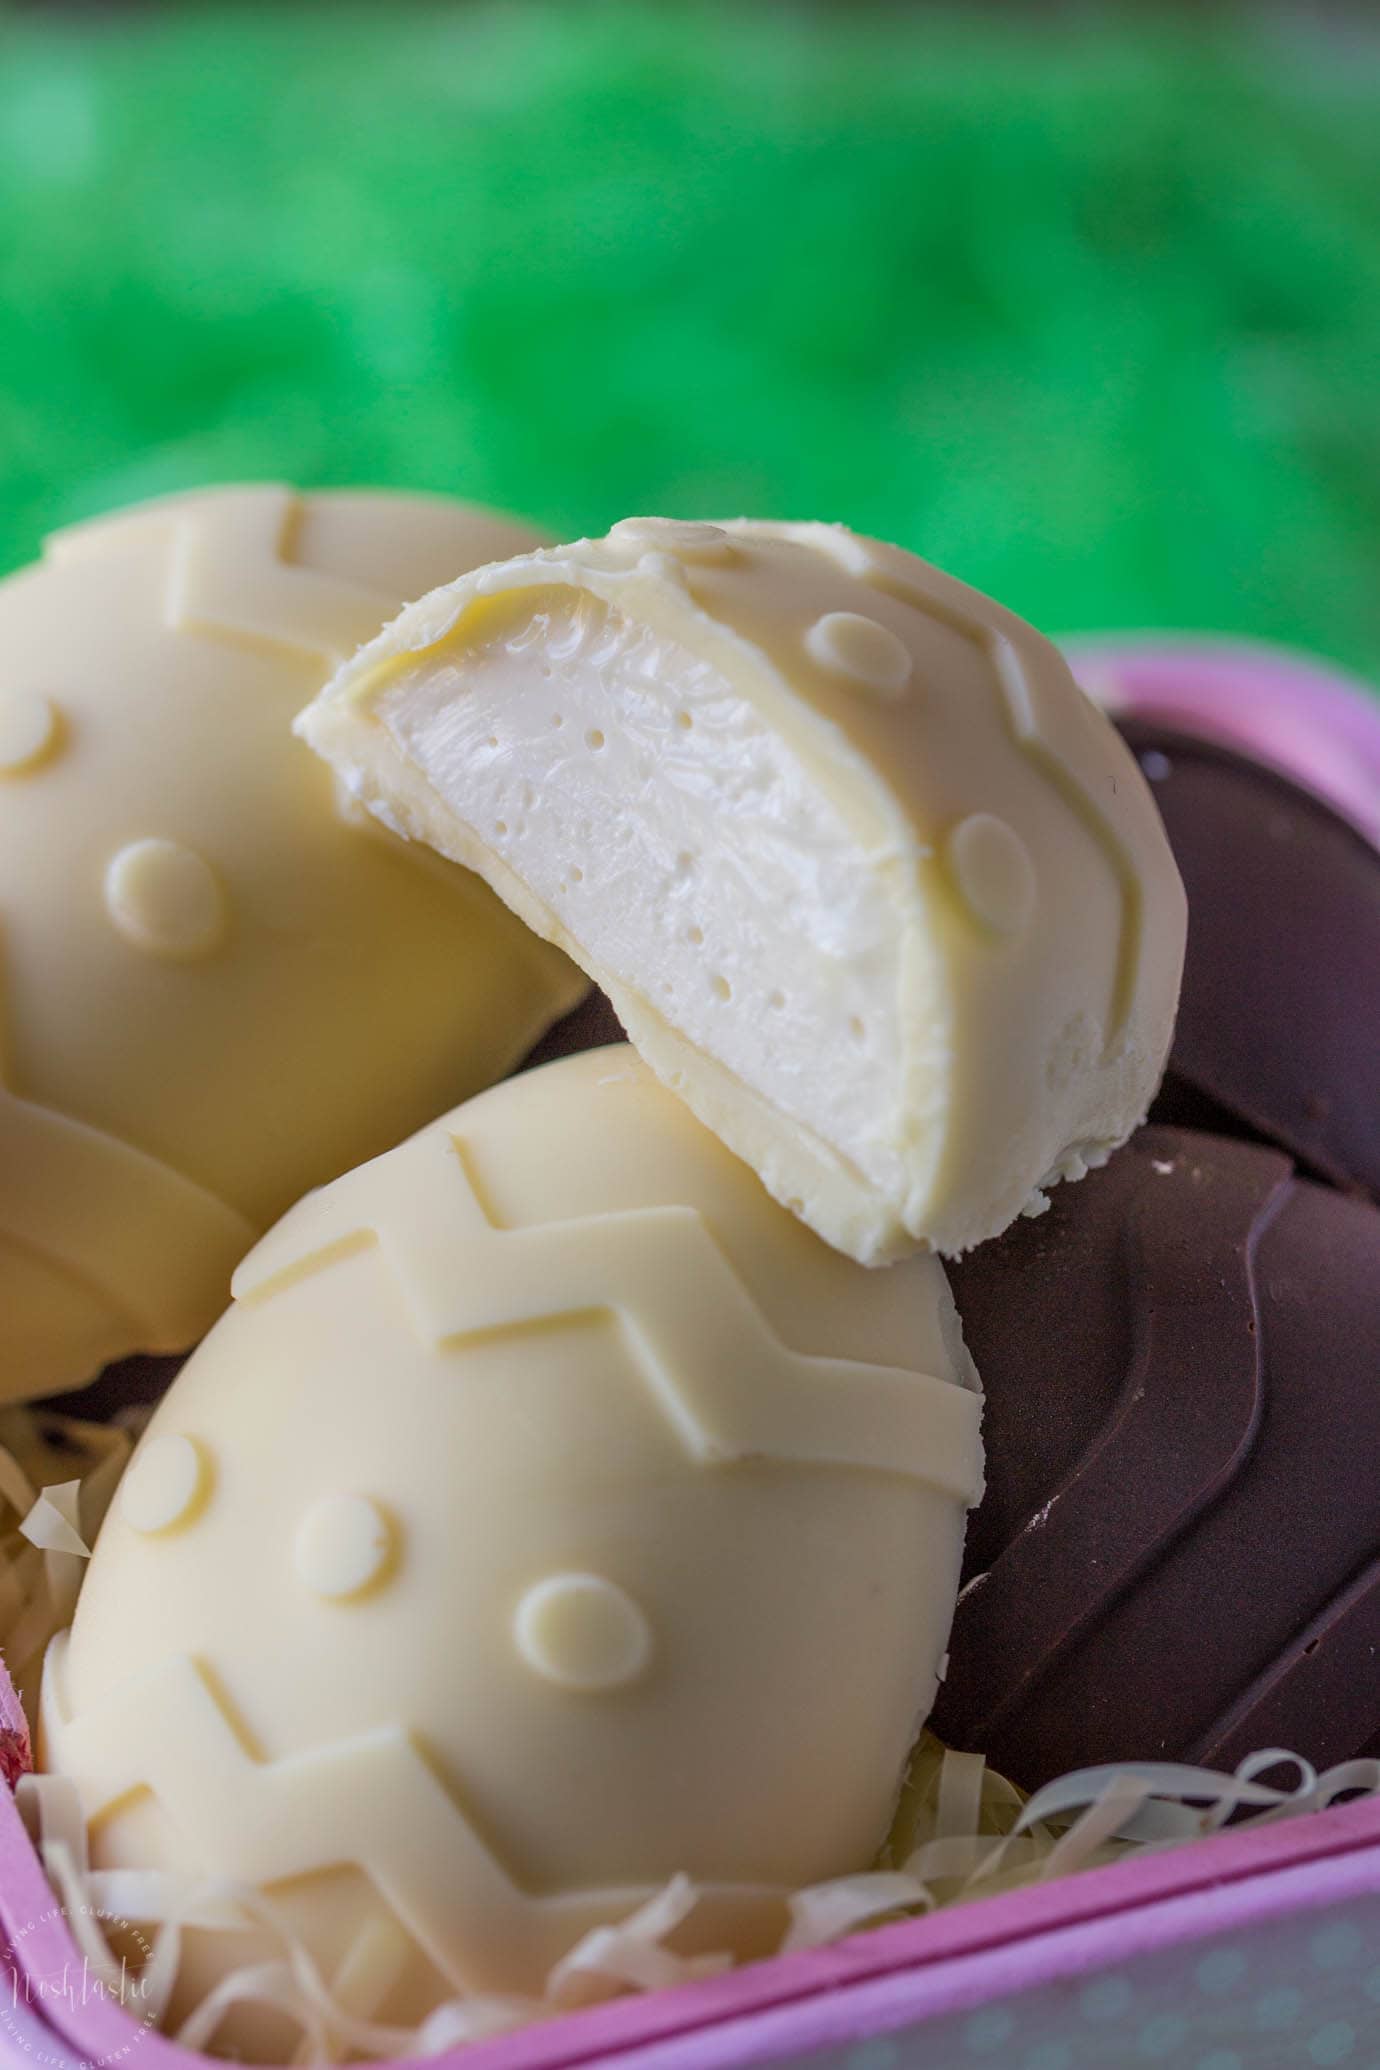 Cheesecake filled Easter eggs recipe